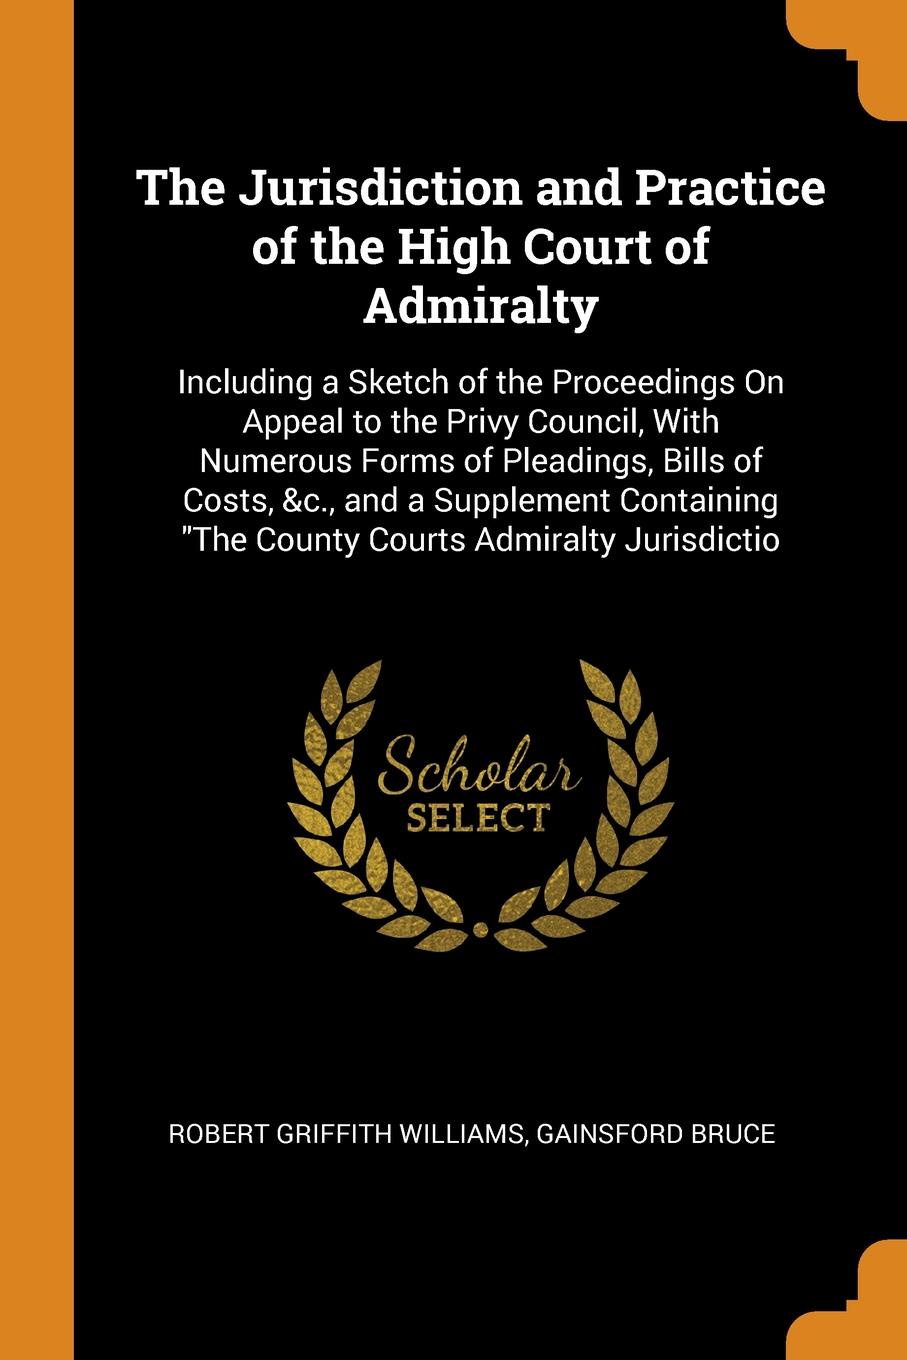 The Jurisdiction and Practice of the High Court of Admiralty. Including a Sketch of the Proceedings On Appeal to the Privy Council, With Numerous Forms of Pleadings, Bills of Costs, &c., and a Supplement Containing \